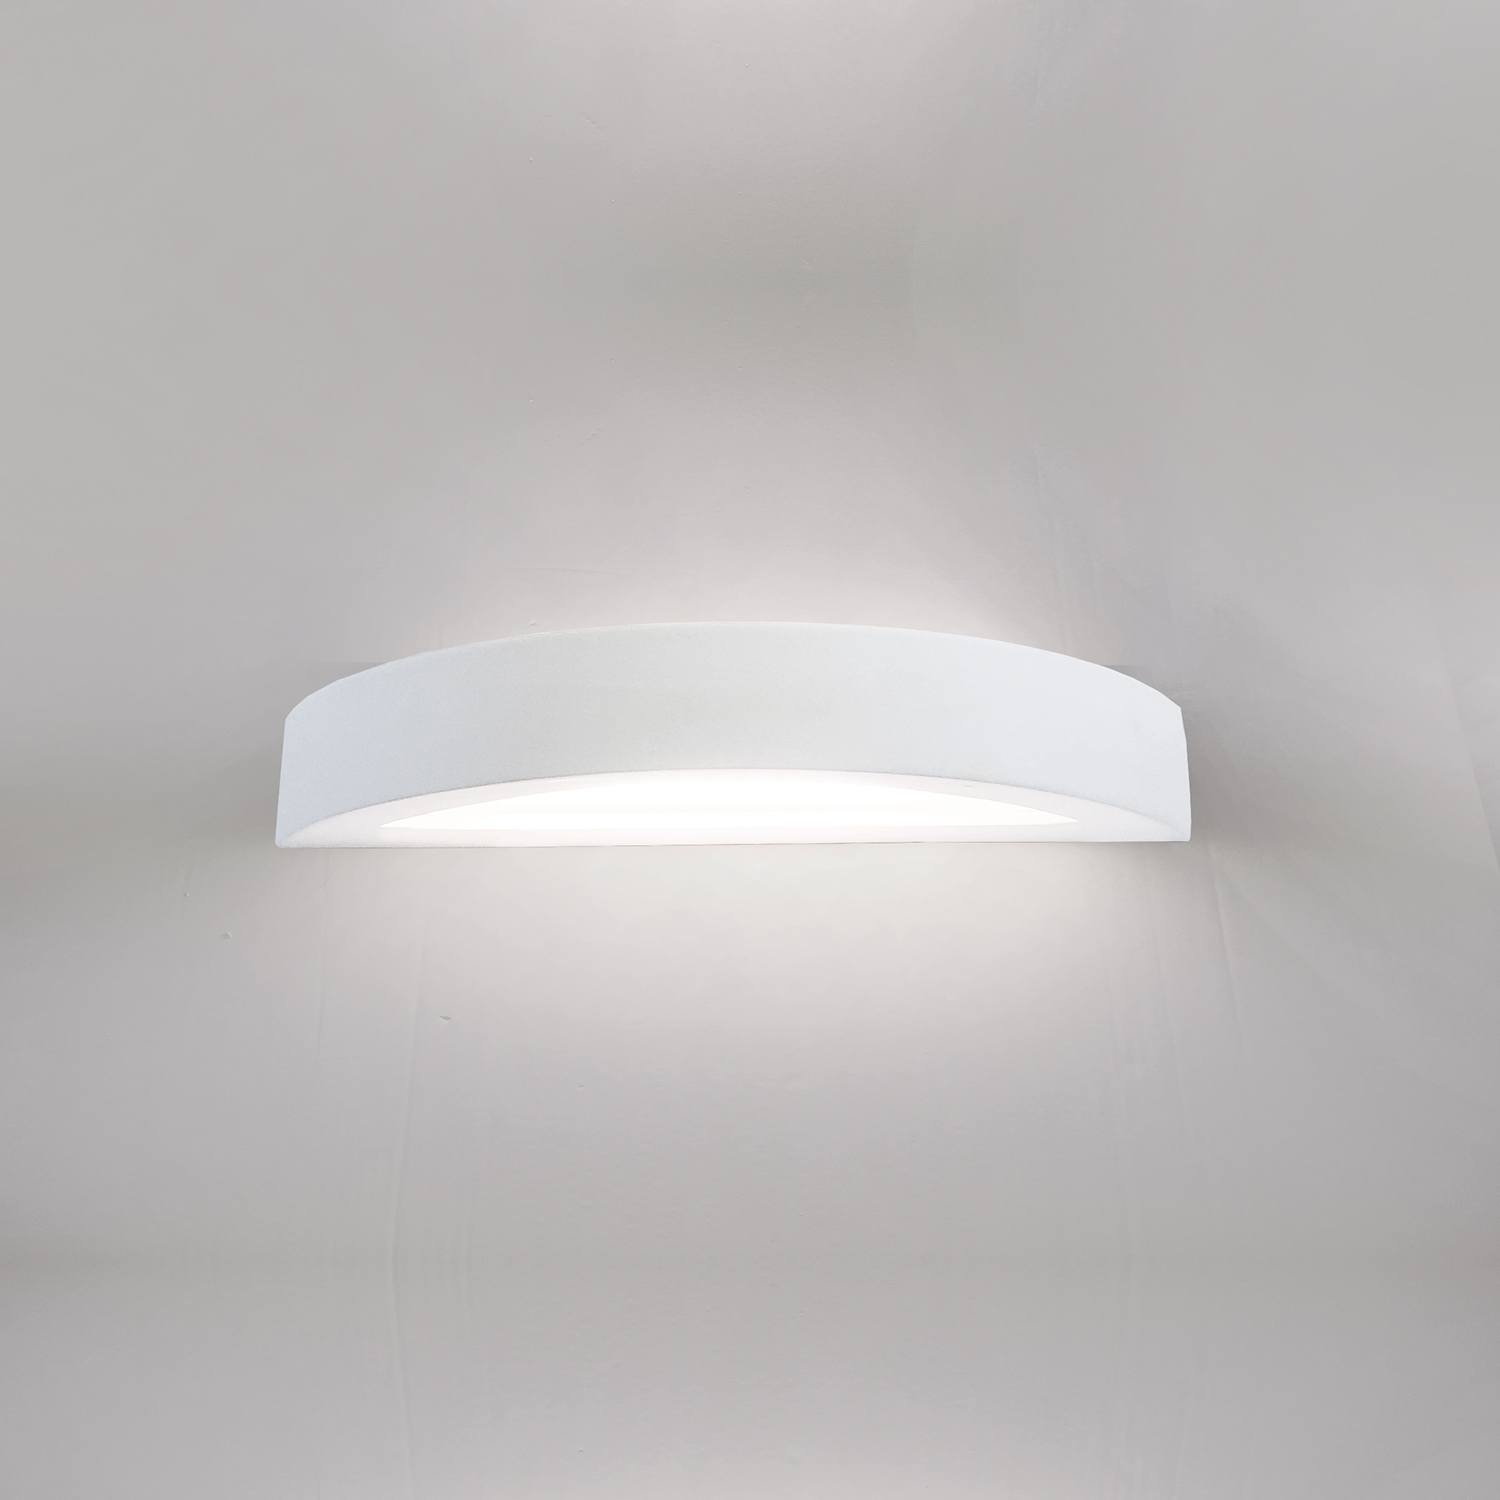 Aplique pared yeso 320mm x 60mm para LED IN089